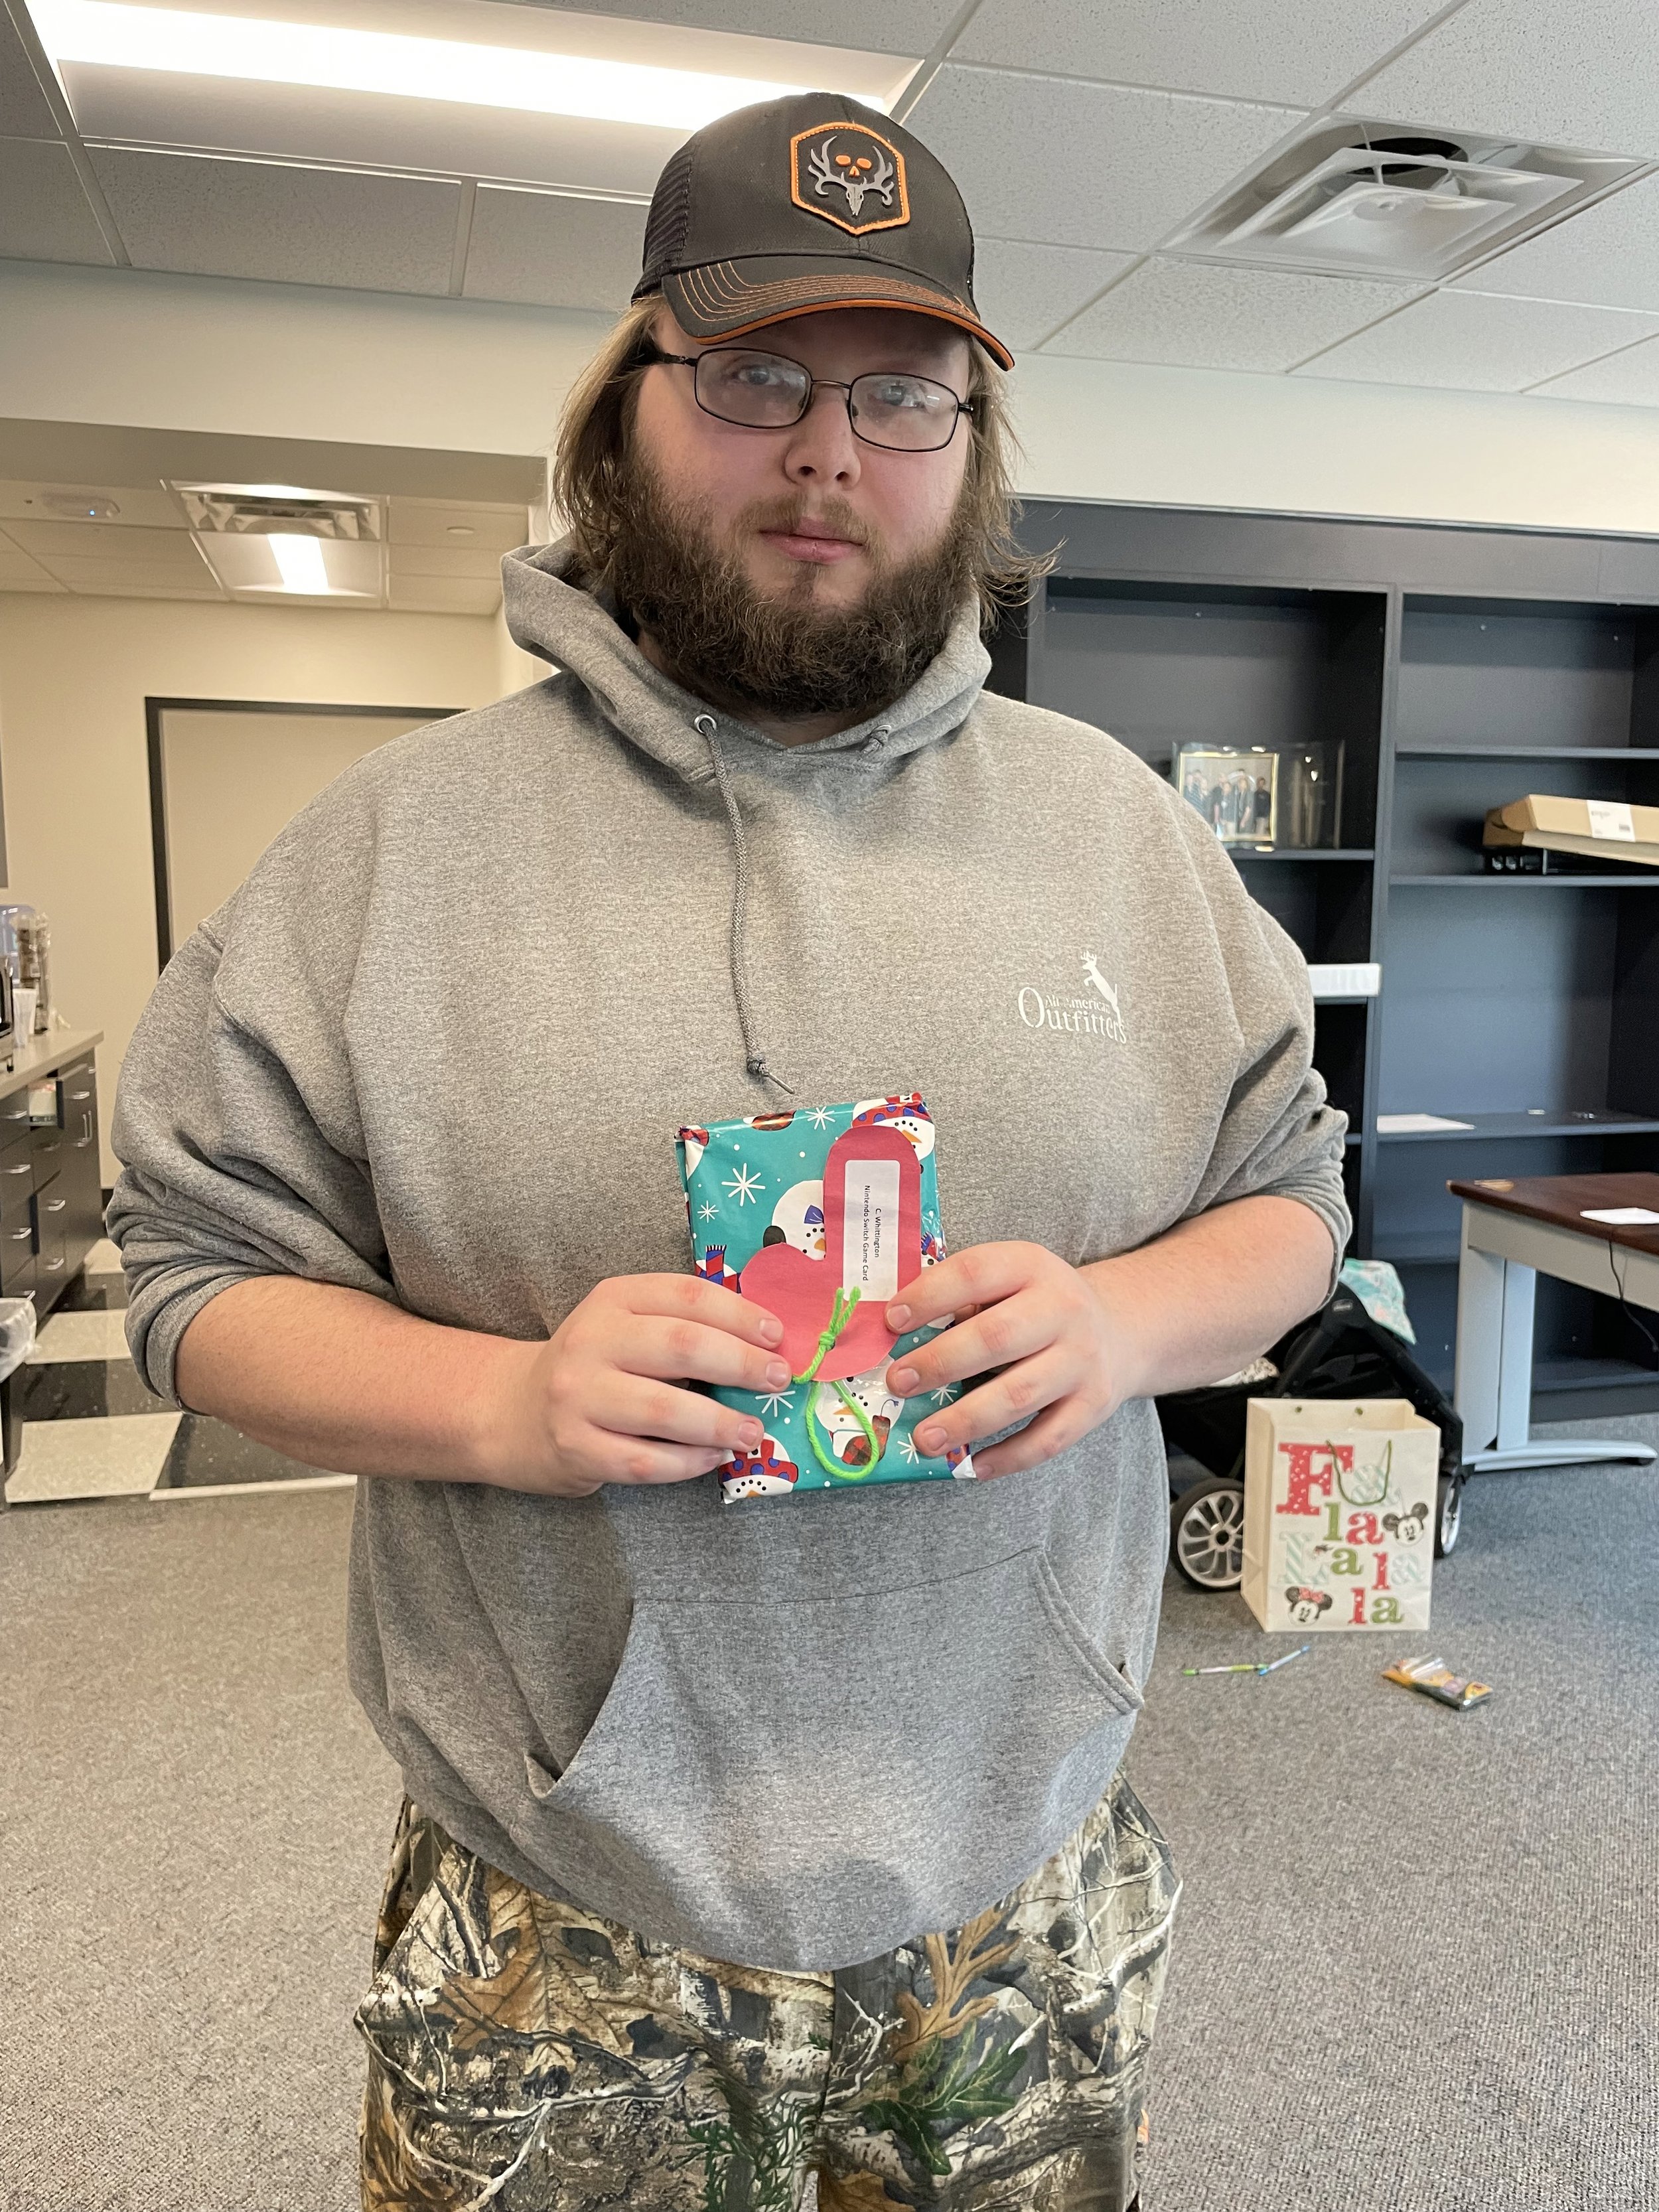 ProjectSEARCH graduate and Winchester Medical Center employee, Colton holds his gift from NW Works